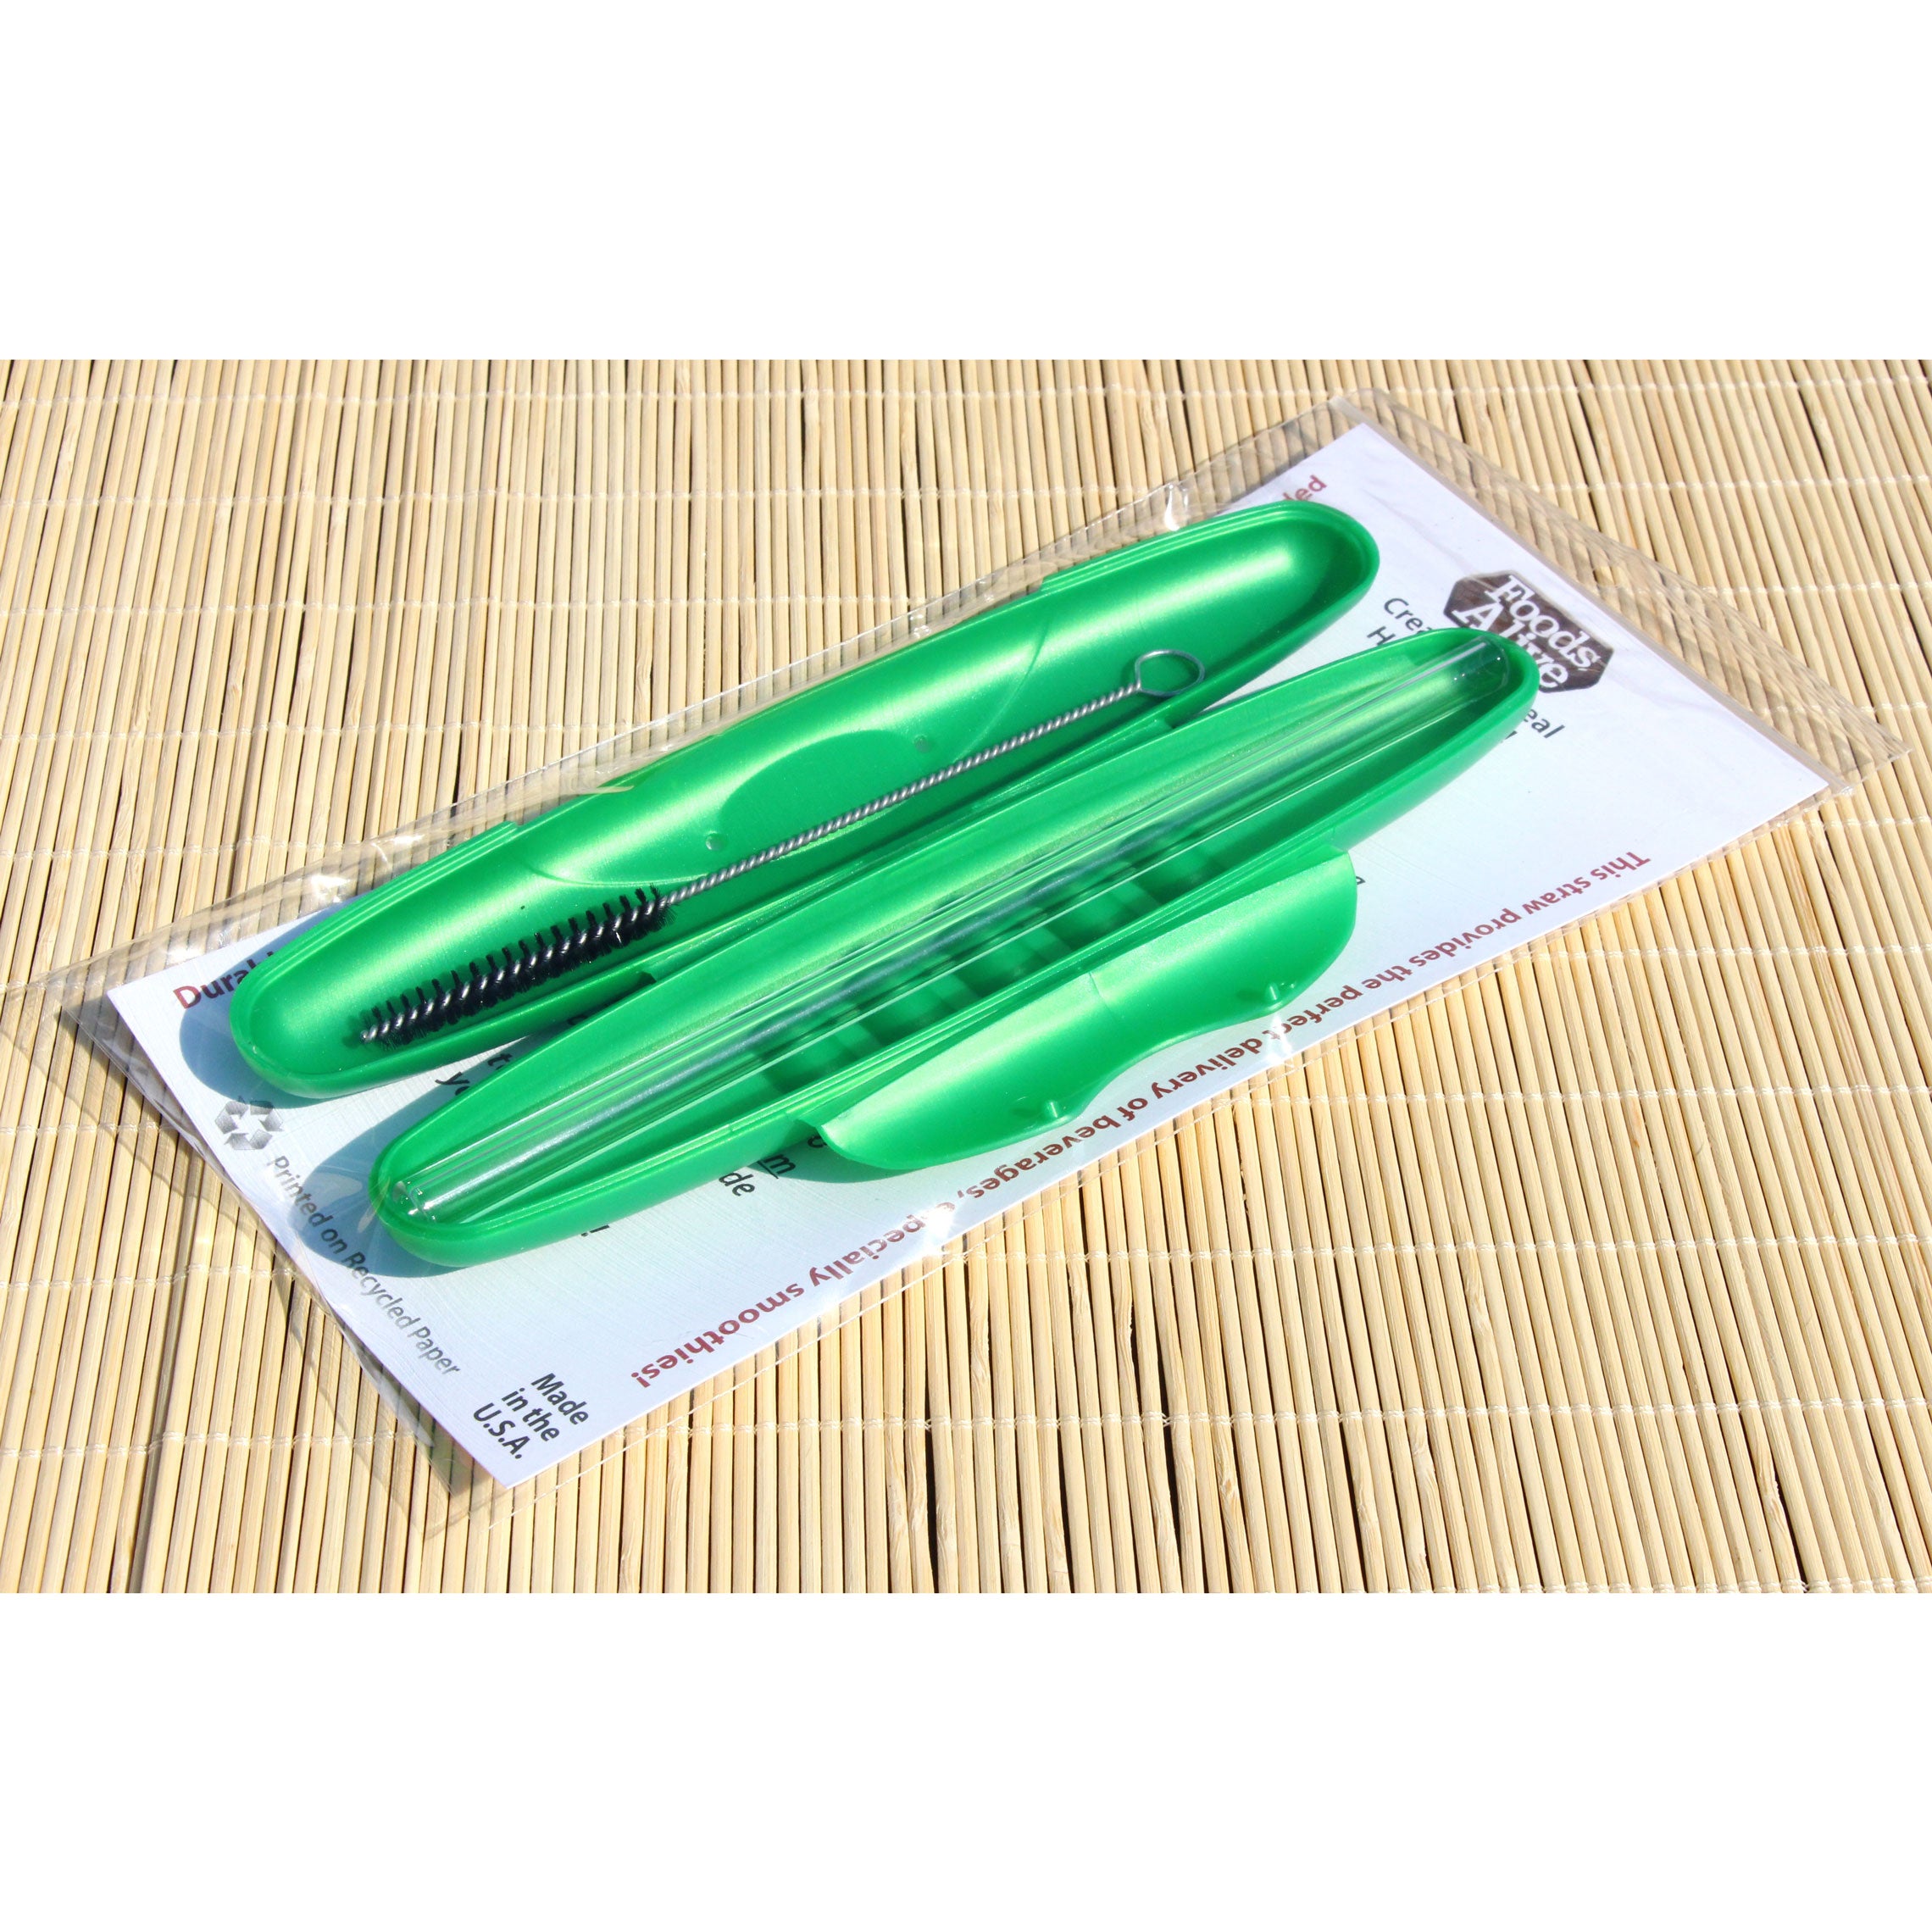 Foods Alive - 8-inch Glass Straw - Regular with Travel Case Combo